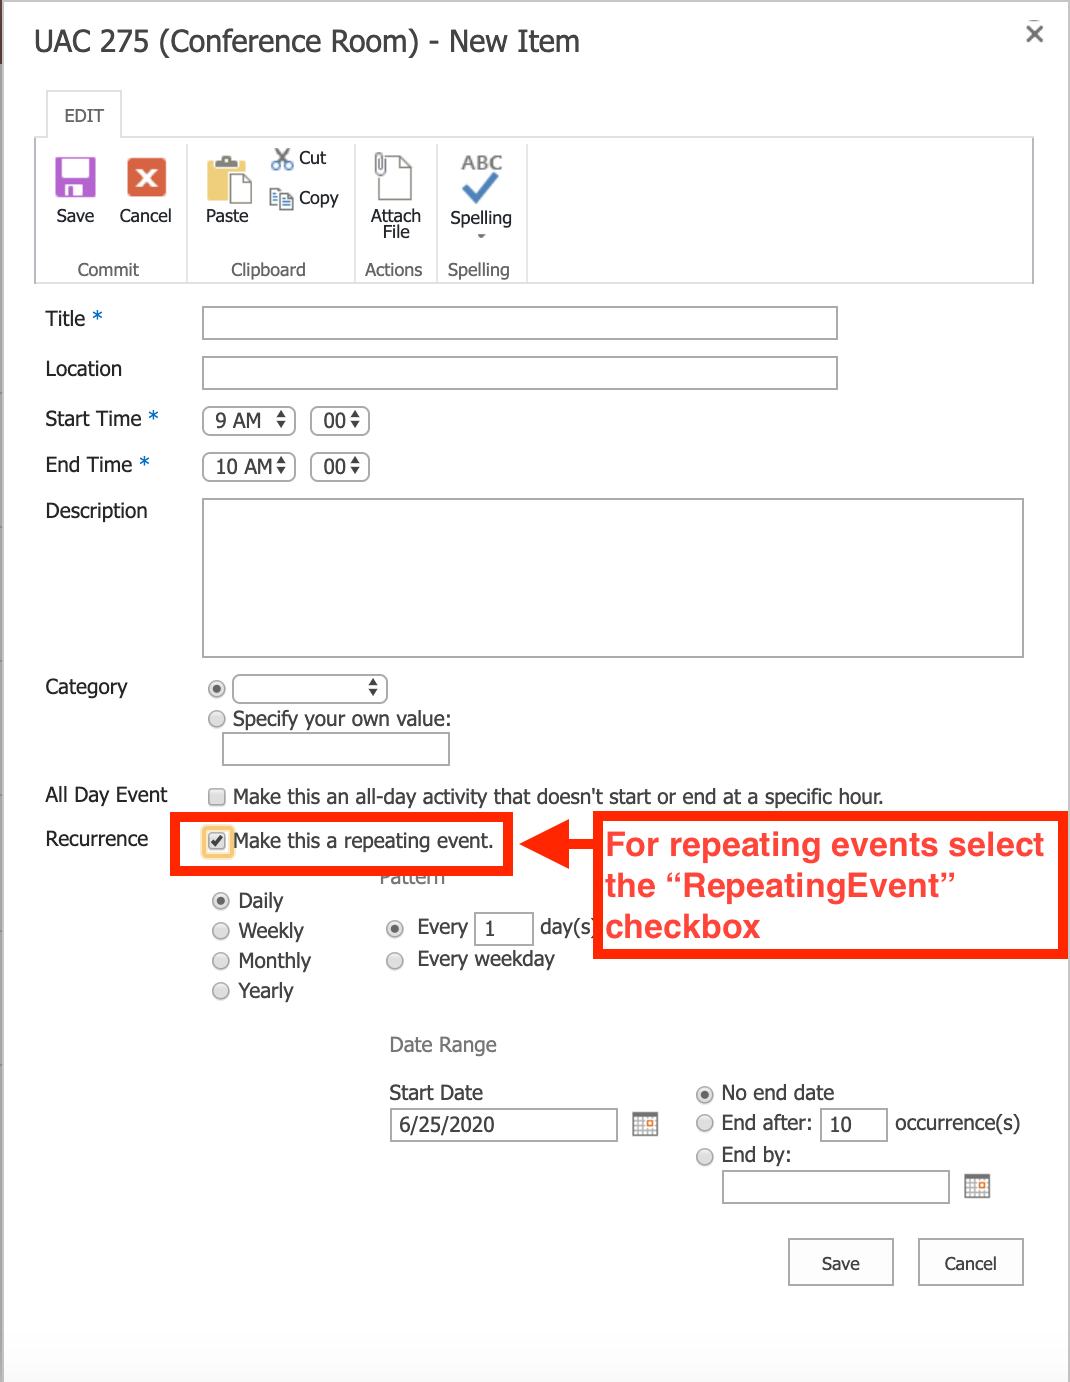 Image of new event form a red box highlights the recurrence section. Text next to it reads "for repeating events select the repeating events checkbox"